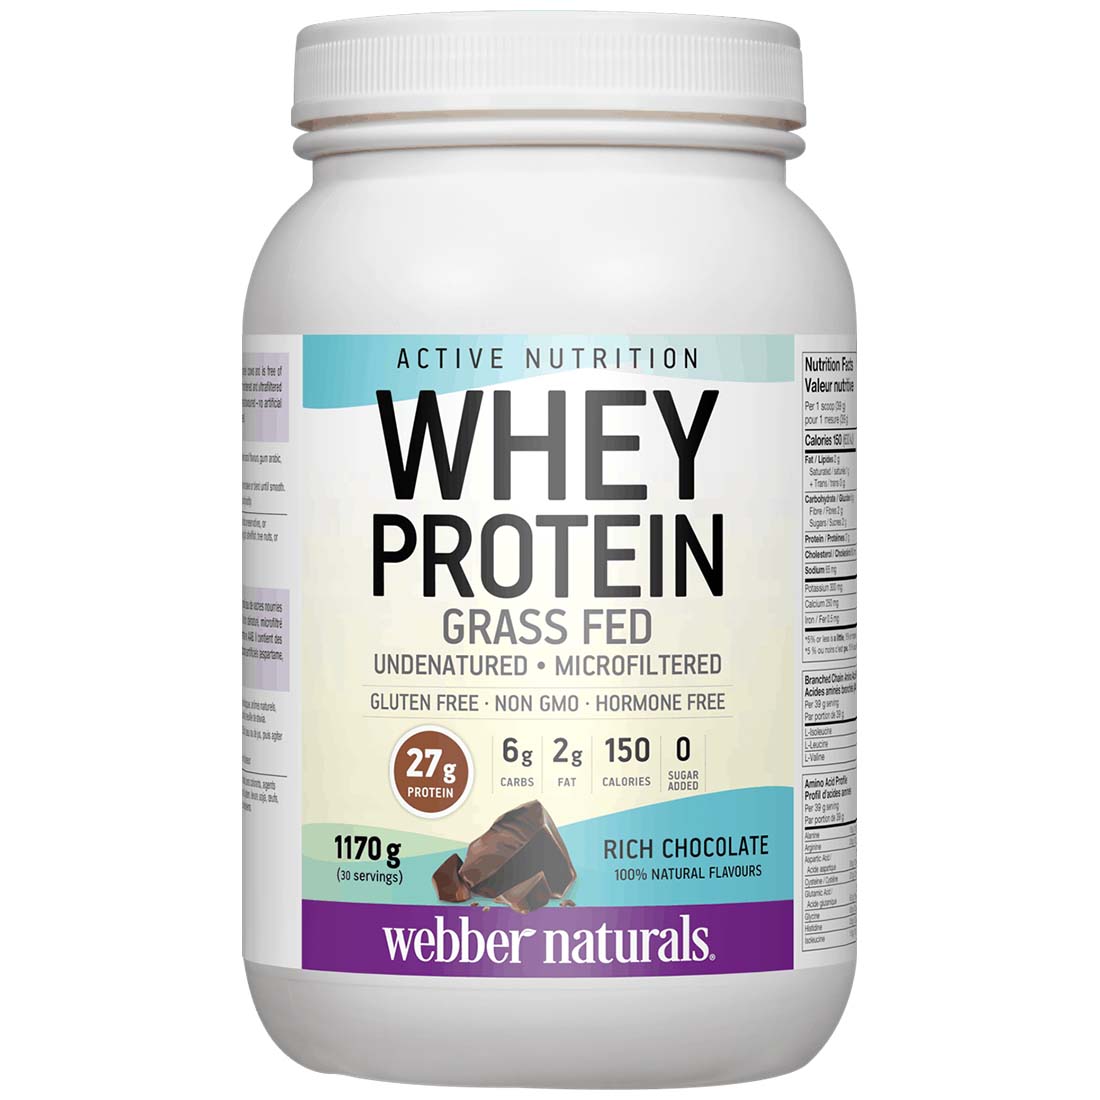 Webber Naturals Grass Fed Whey Protein, 27g Protein, All Natural, Non-GMO, Gluten-Free, 30 Servings